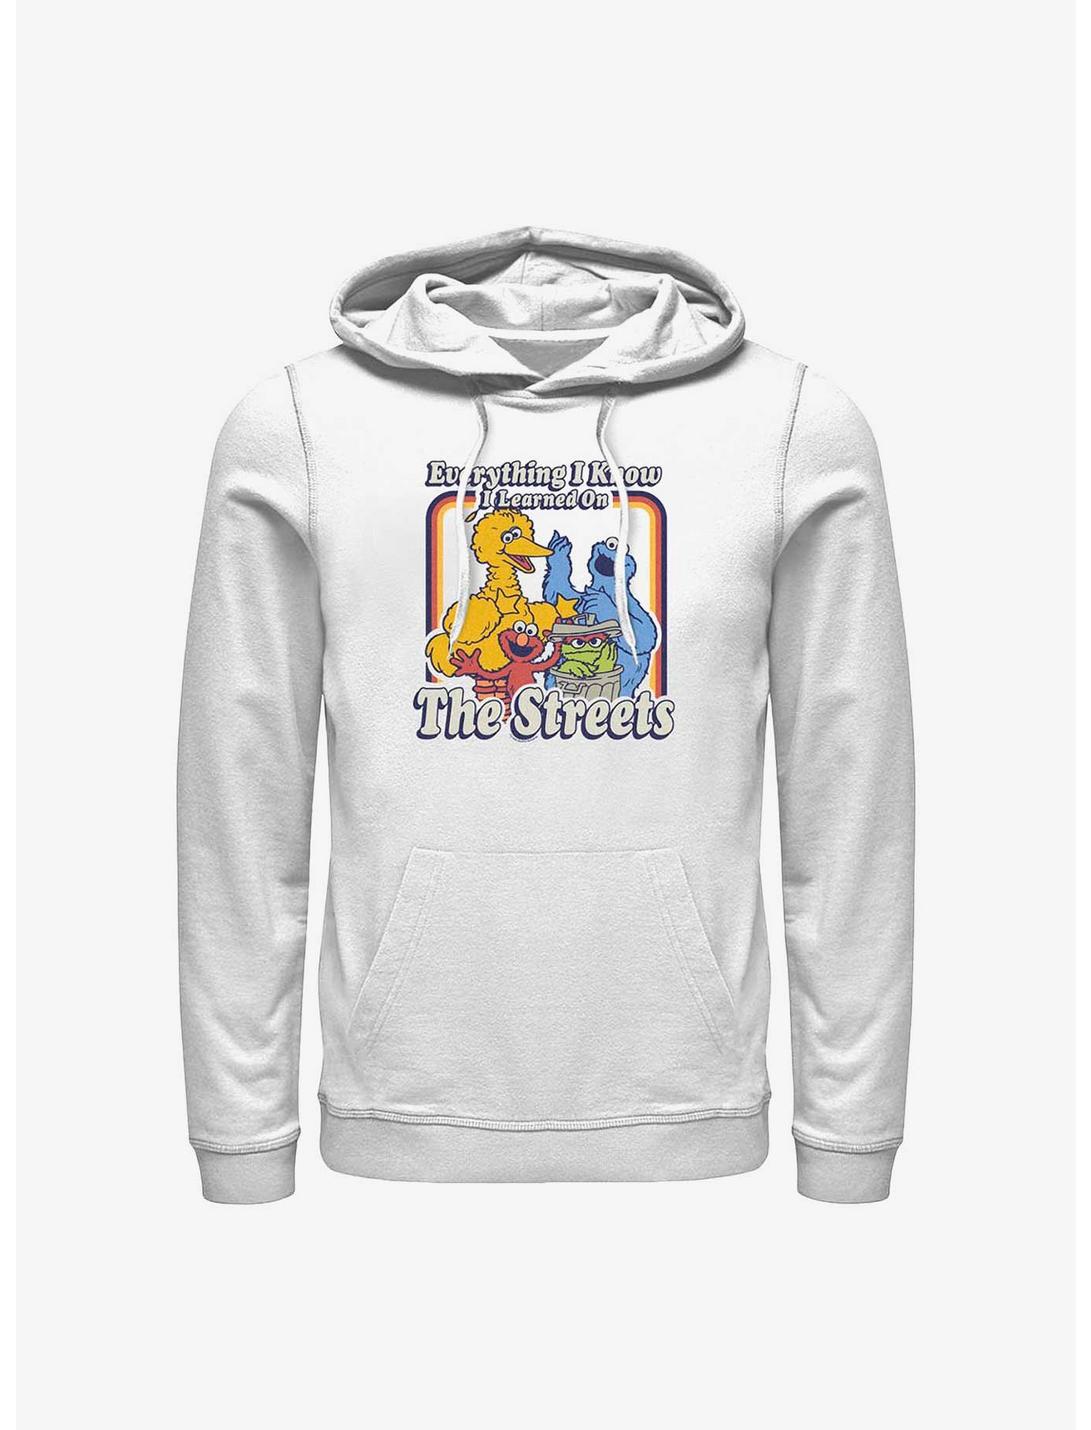 Sesame Street Everything I Know I Learned On The Streets Hoodie, WHITE, hi-res